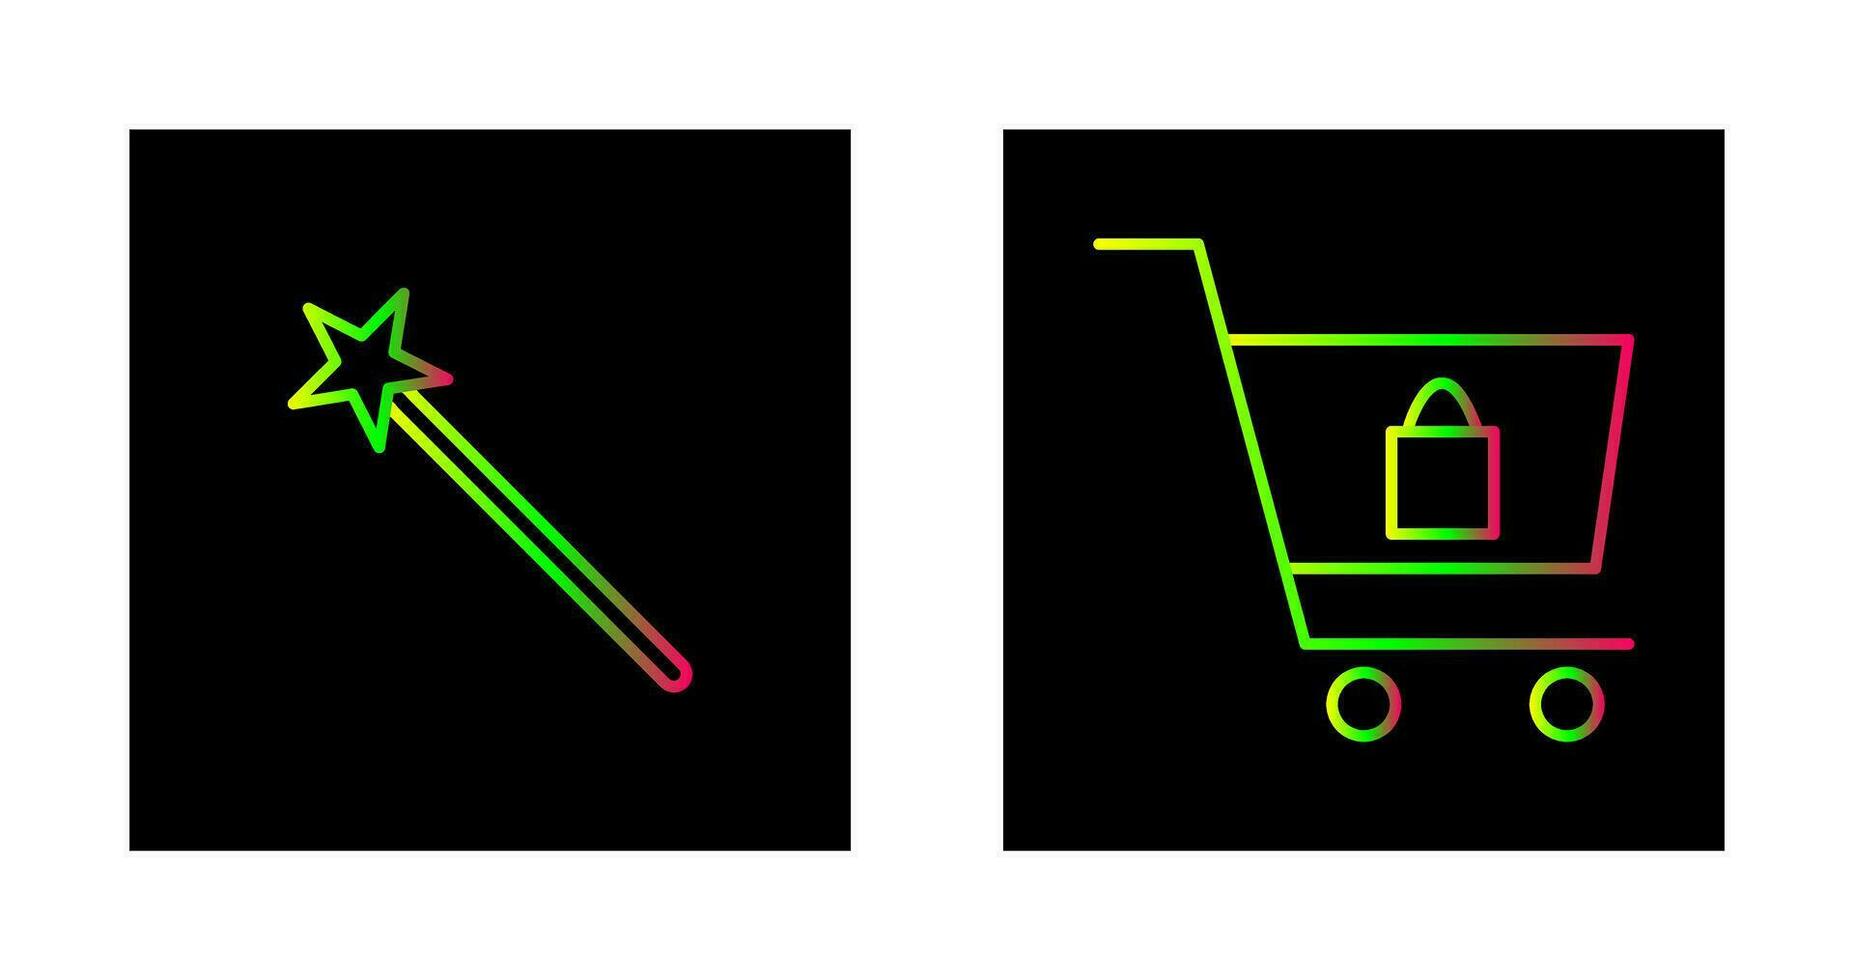 magic and shopping  Icon vector